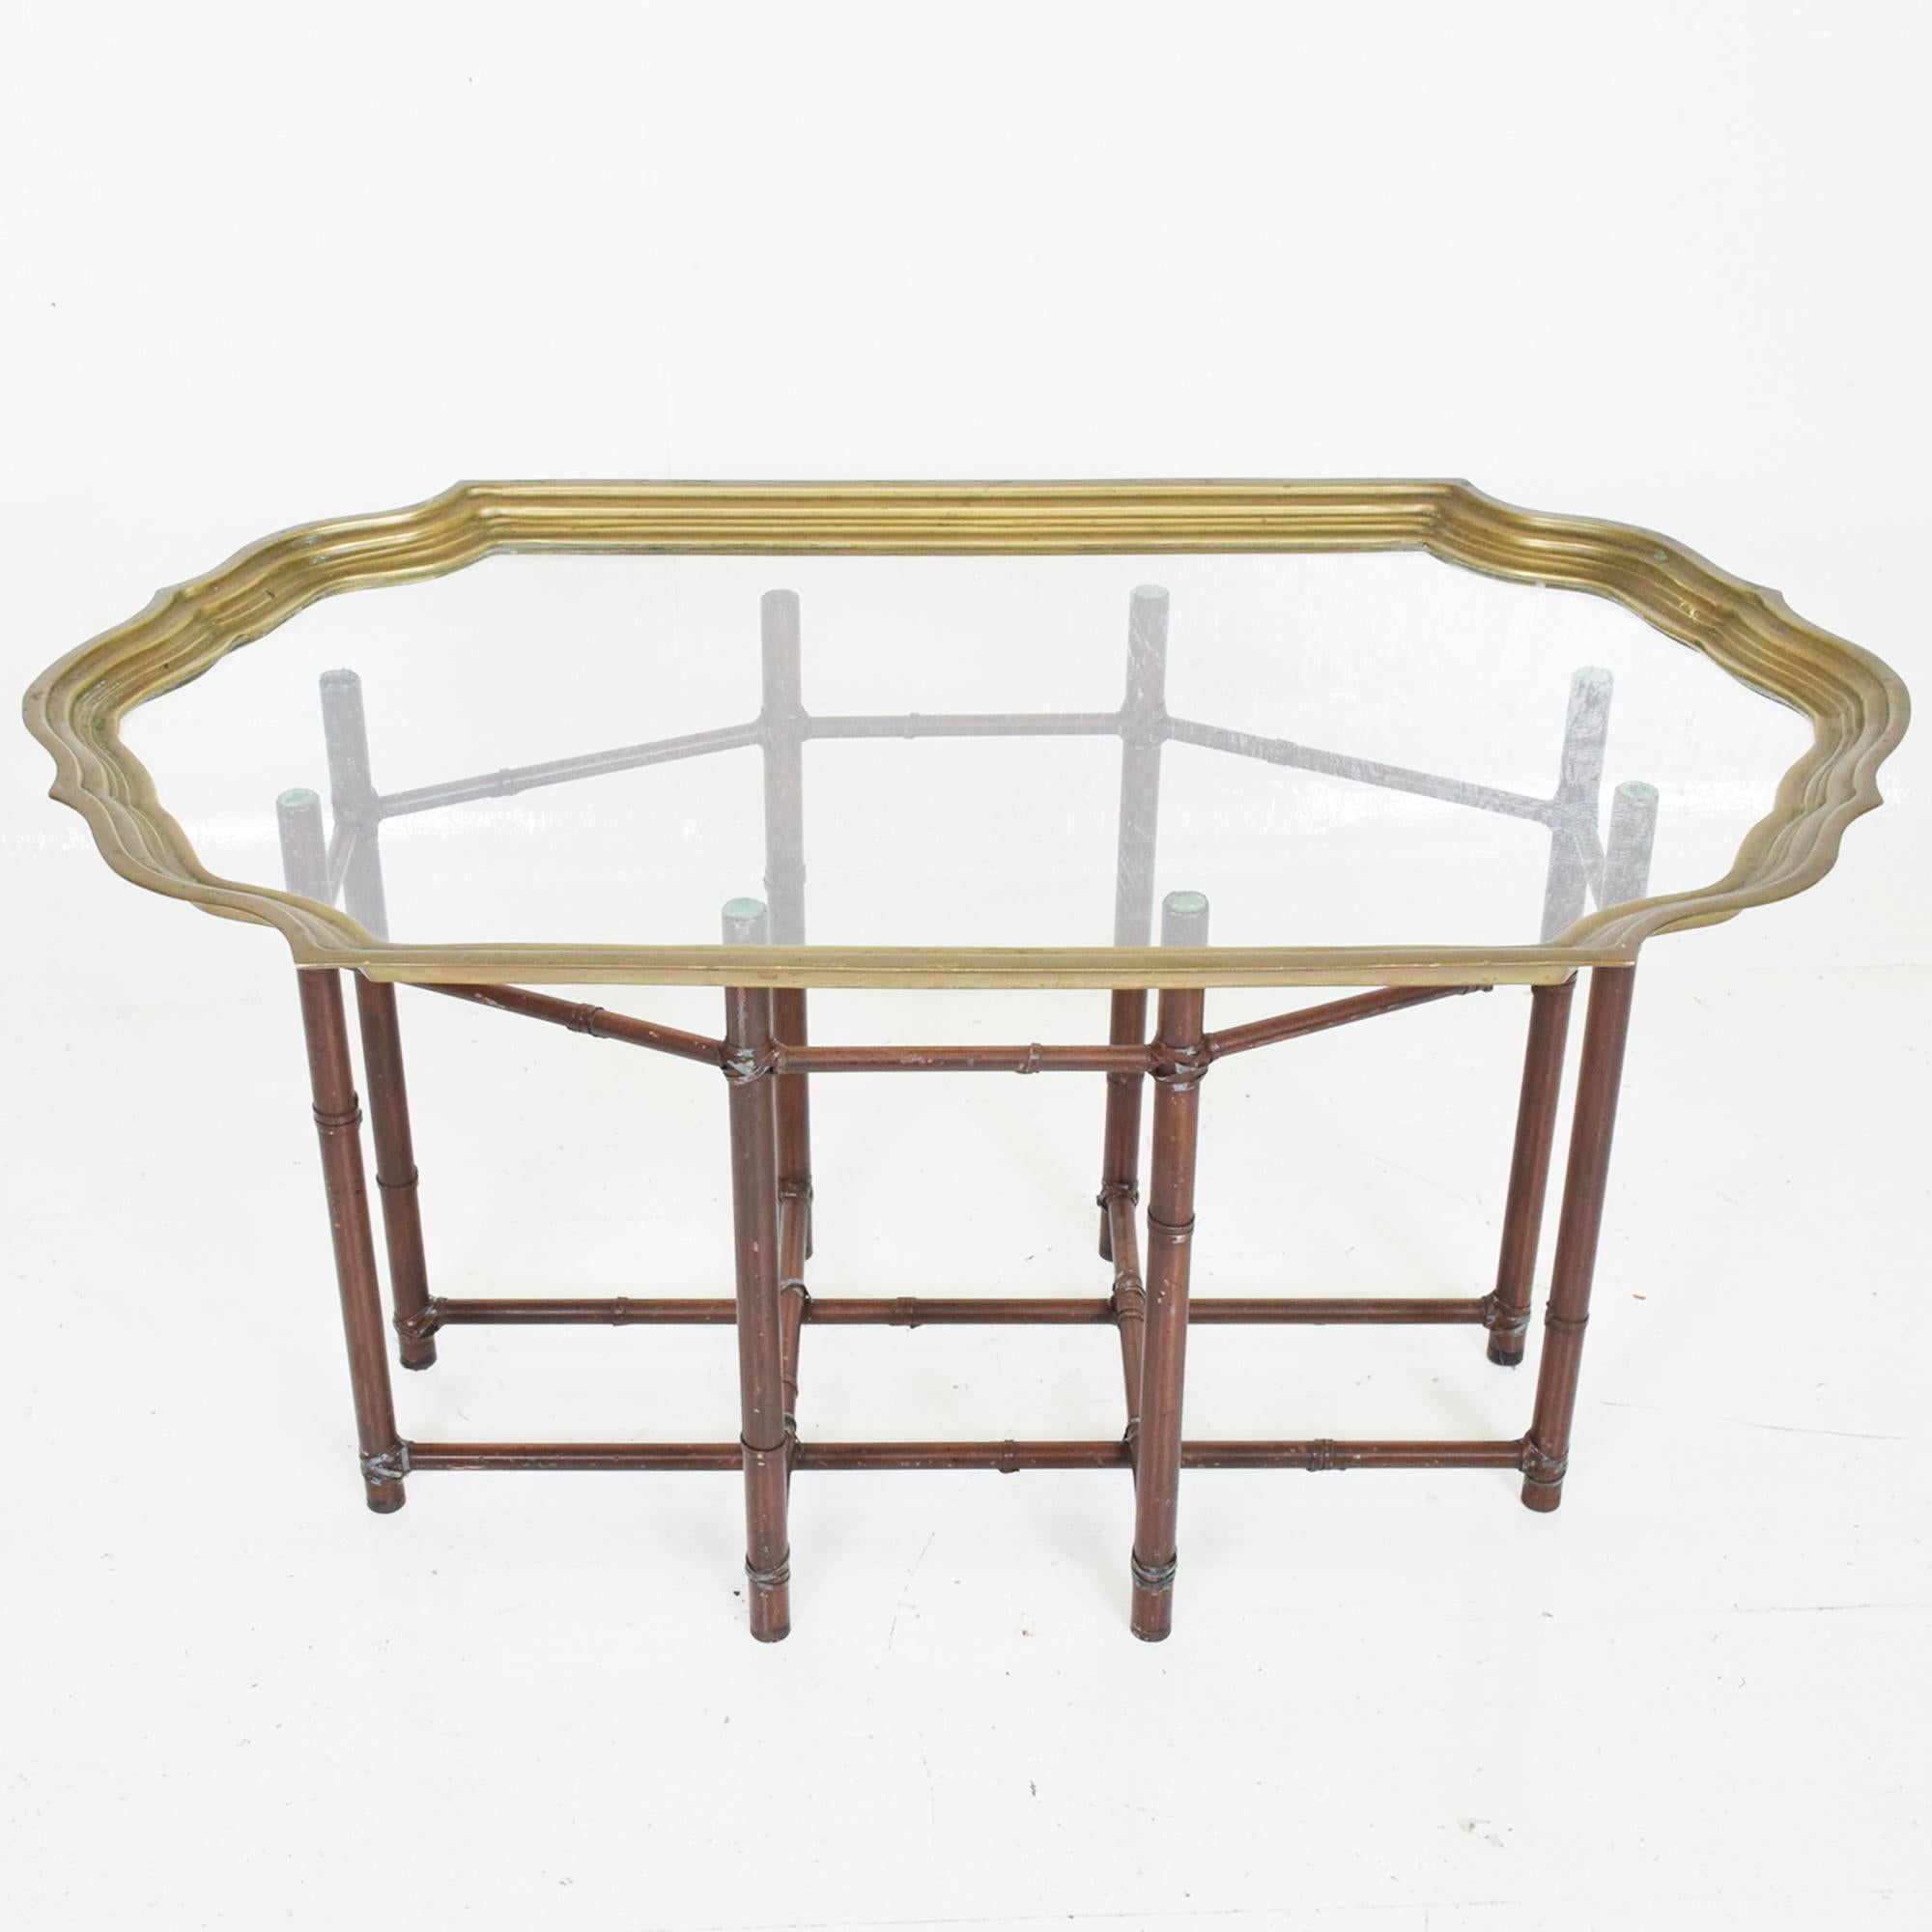 American 1970s Regency Faux Bamboo & Glass Cocktail Table by Baker Furniture Co